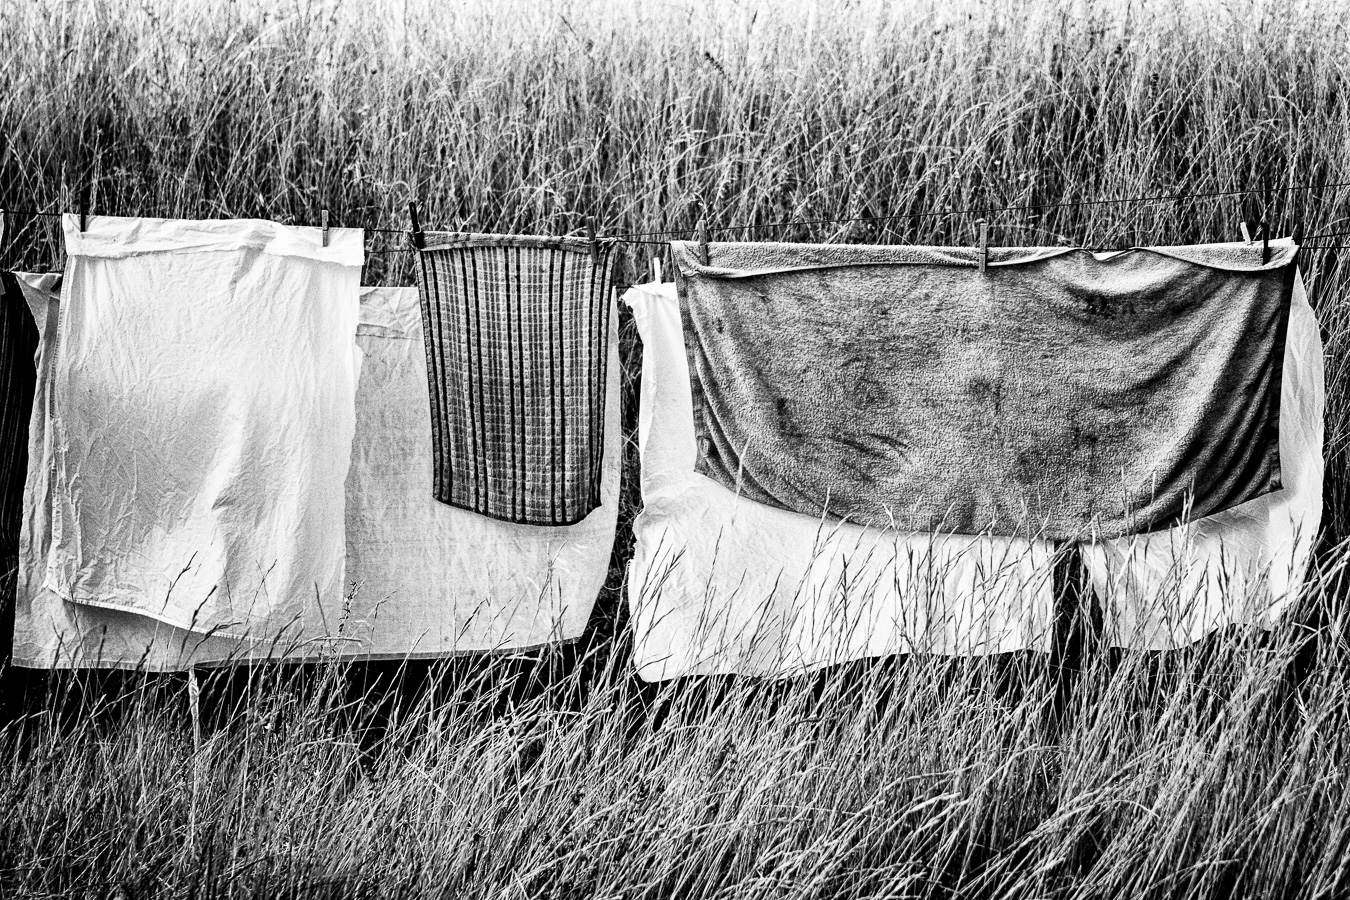 Clothes drying in the wind